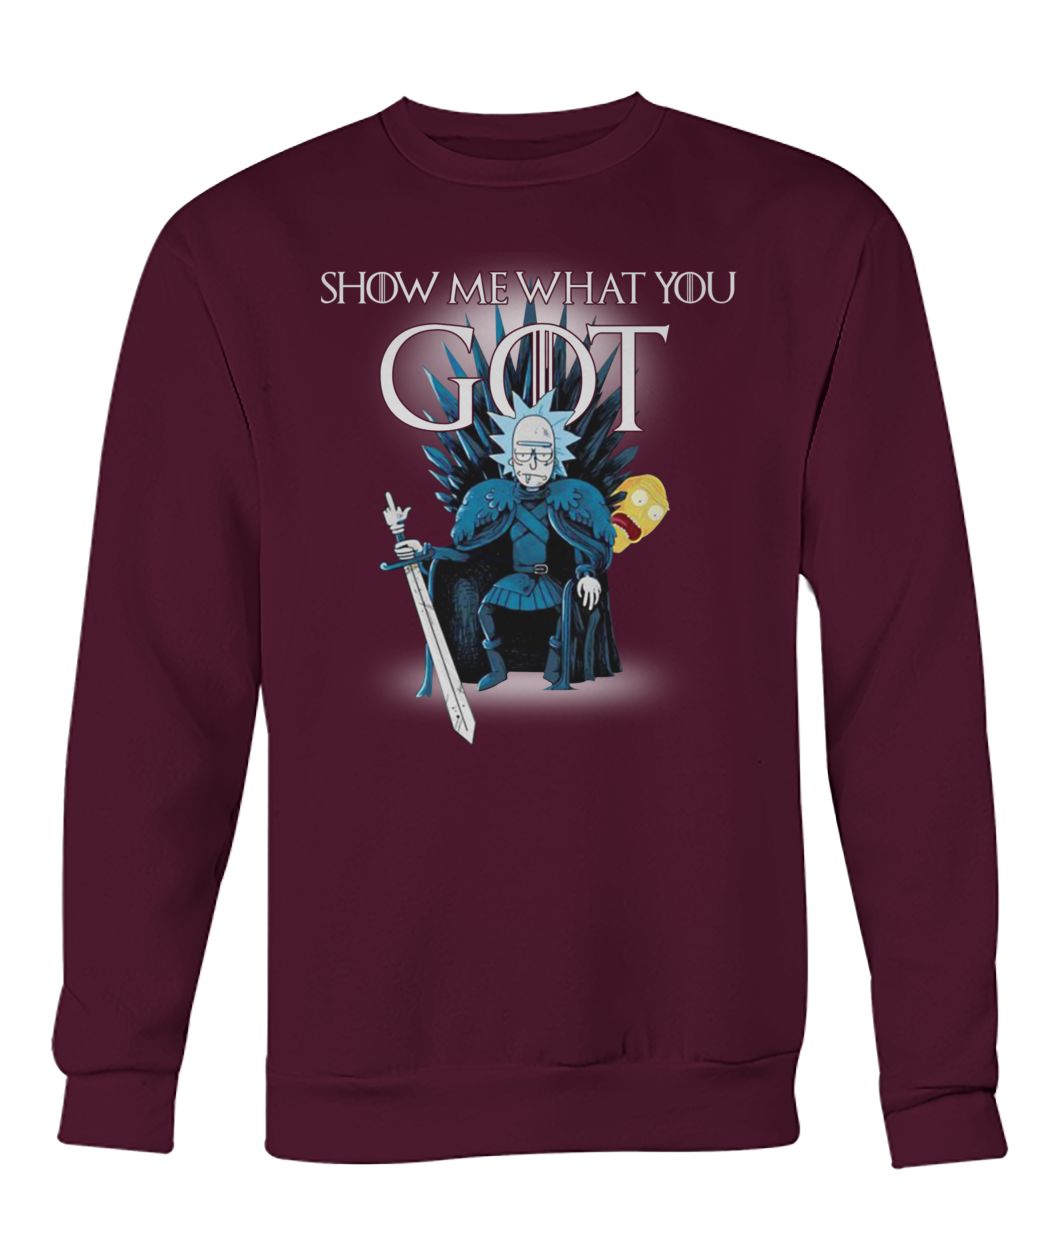 Game of thrones rick and morty show me what you got crew neck sweatshirt